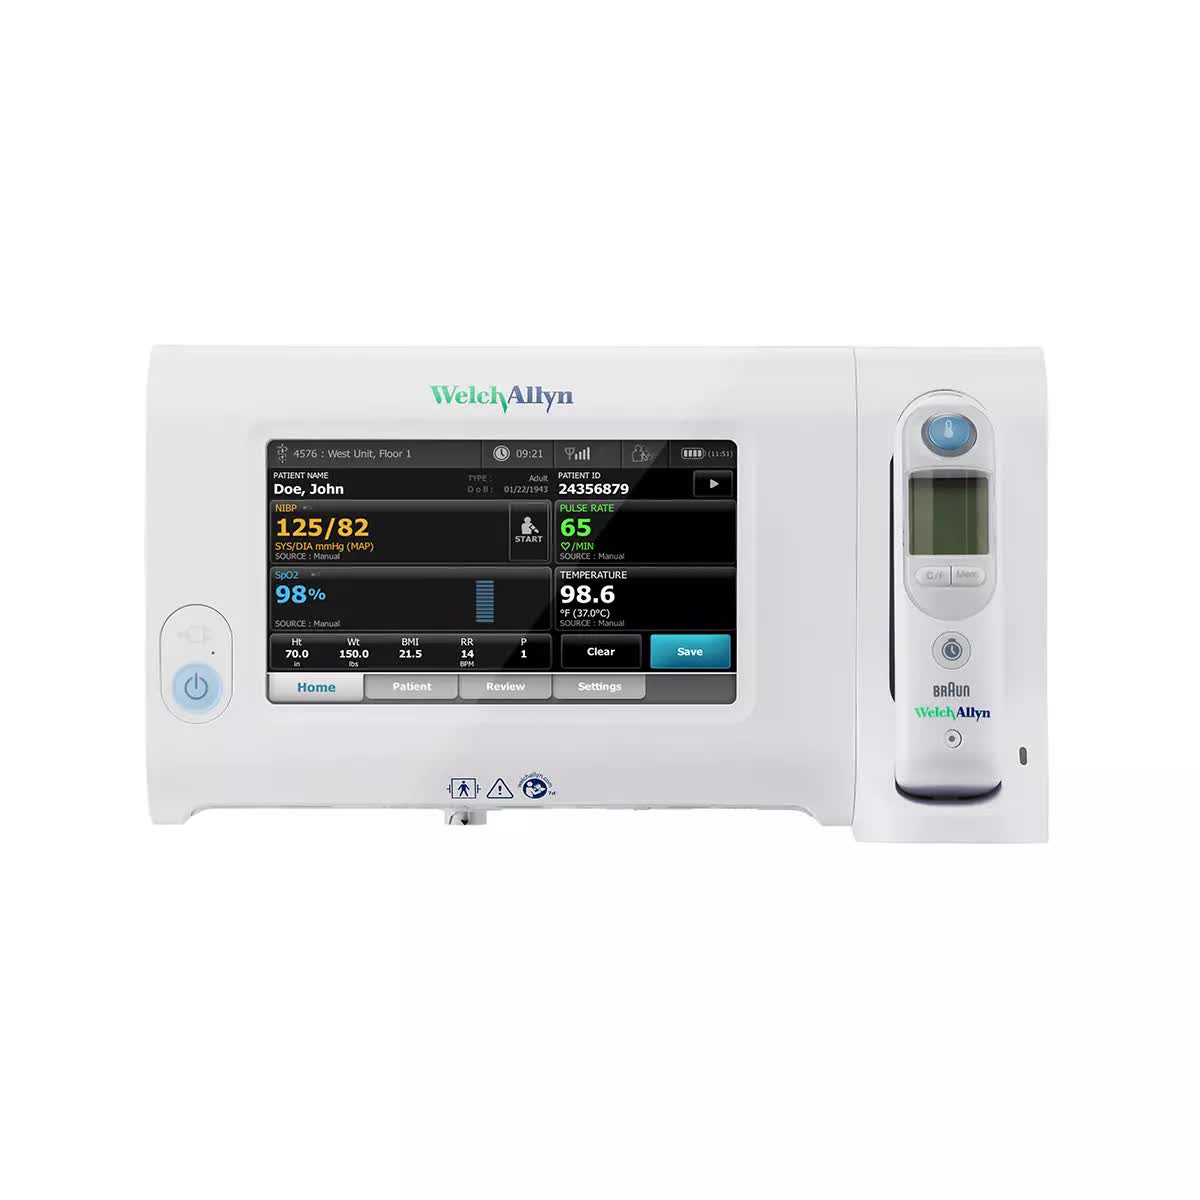 Welch Allyn Connex 7500 WIFI Connectivity Spot Monitor with Masimo SpO2 and Braun Pro6000